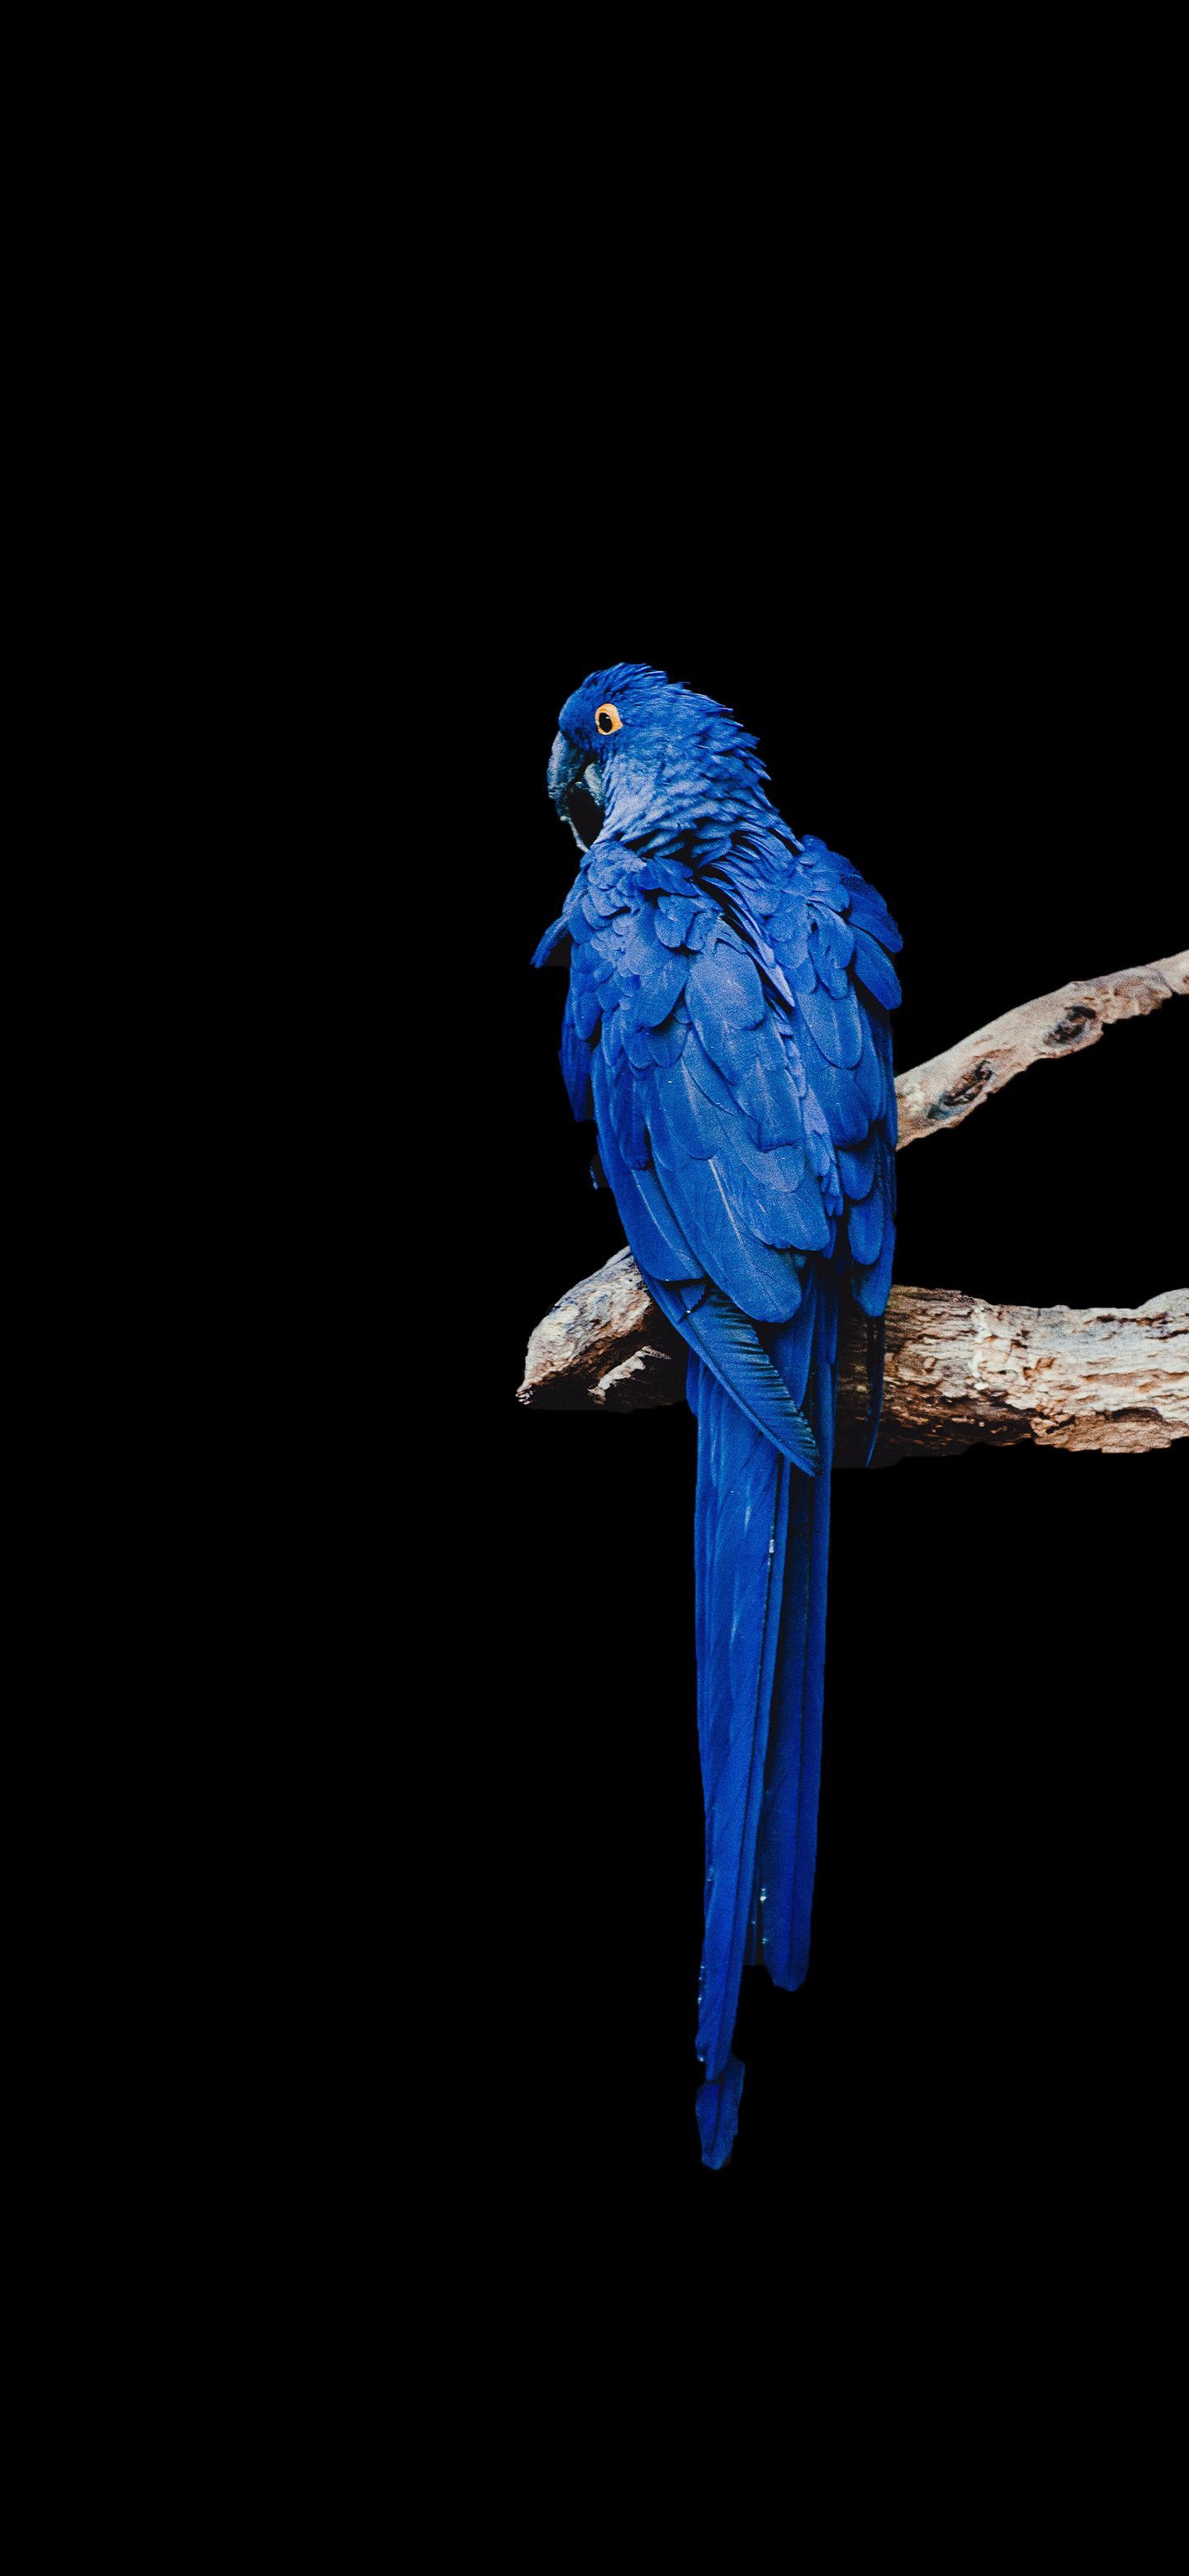 Blue Macaw Amoled Wallpaper In